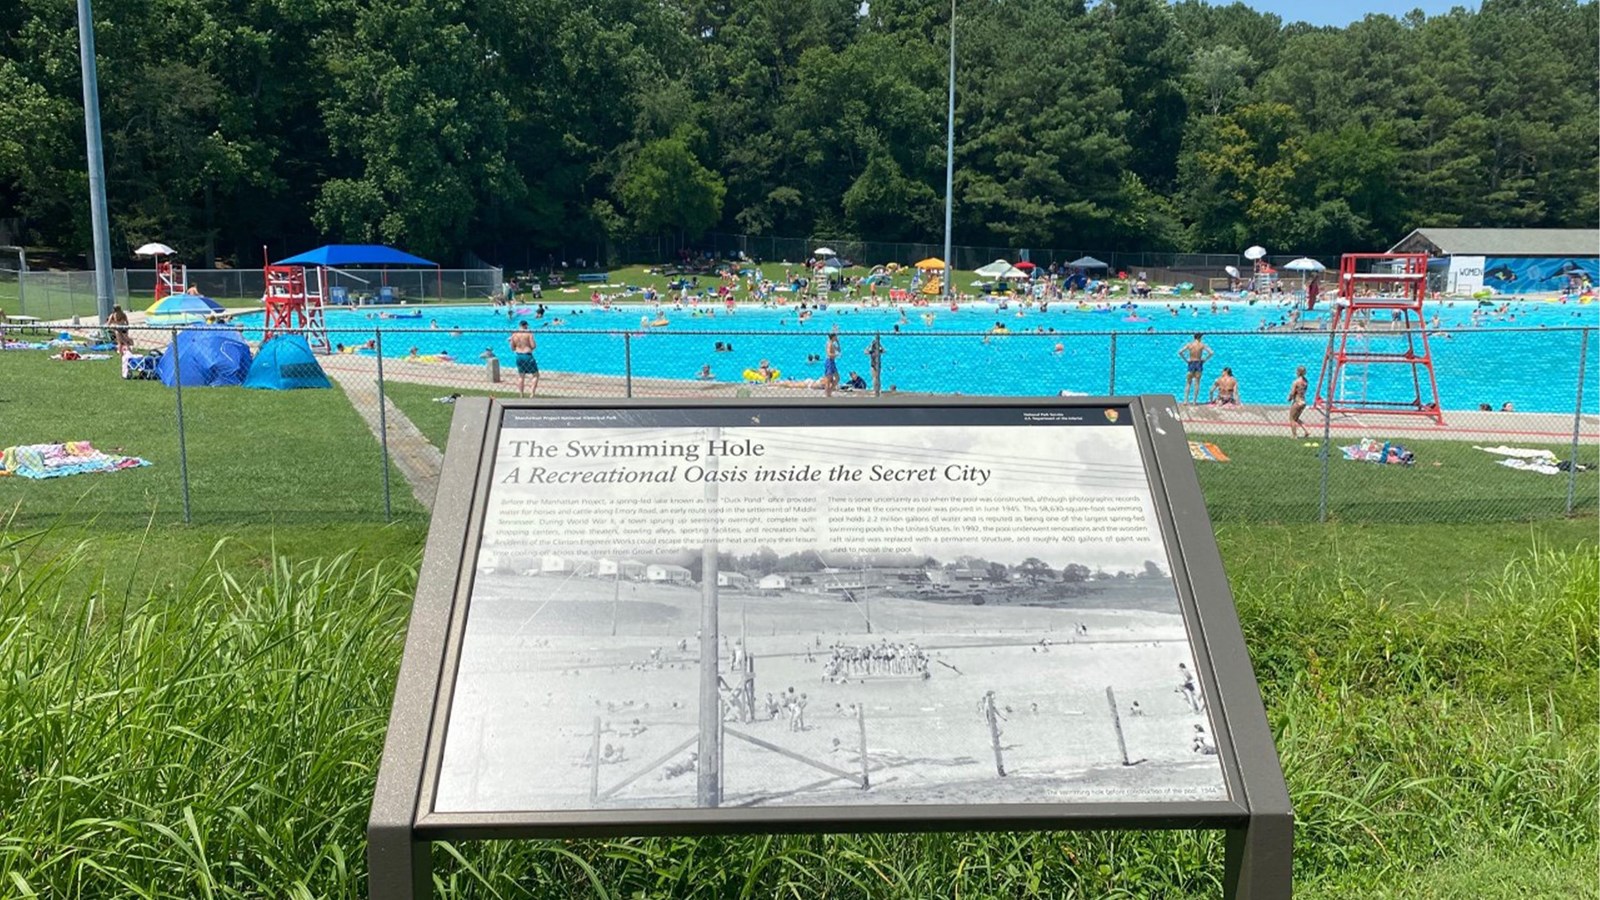 A wayside exhibit in the foreground of a large public pool.